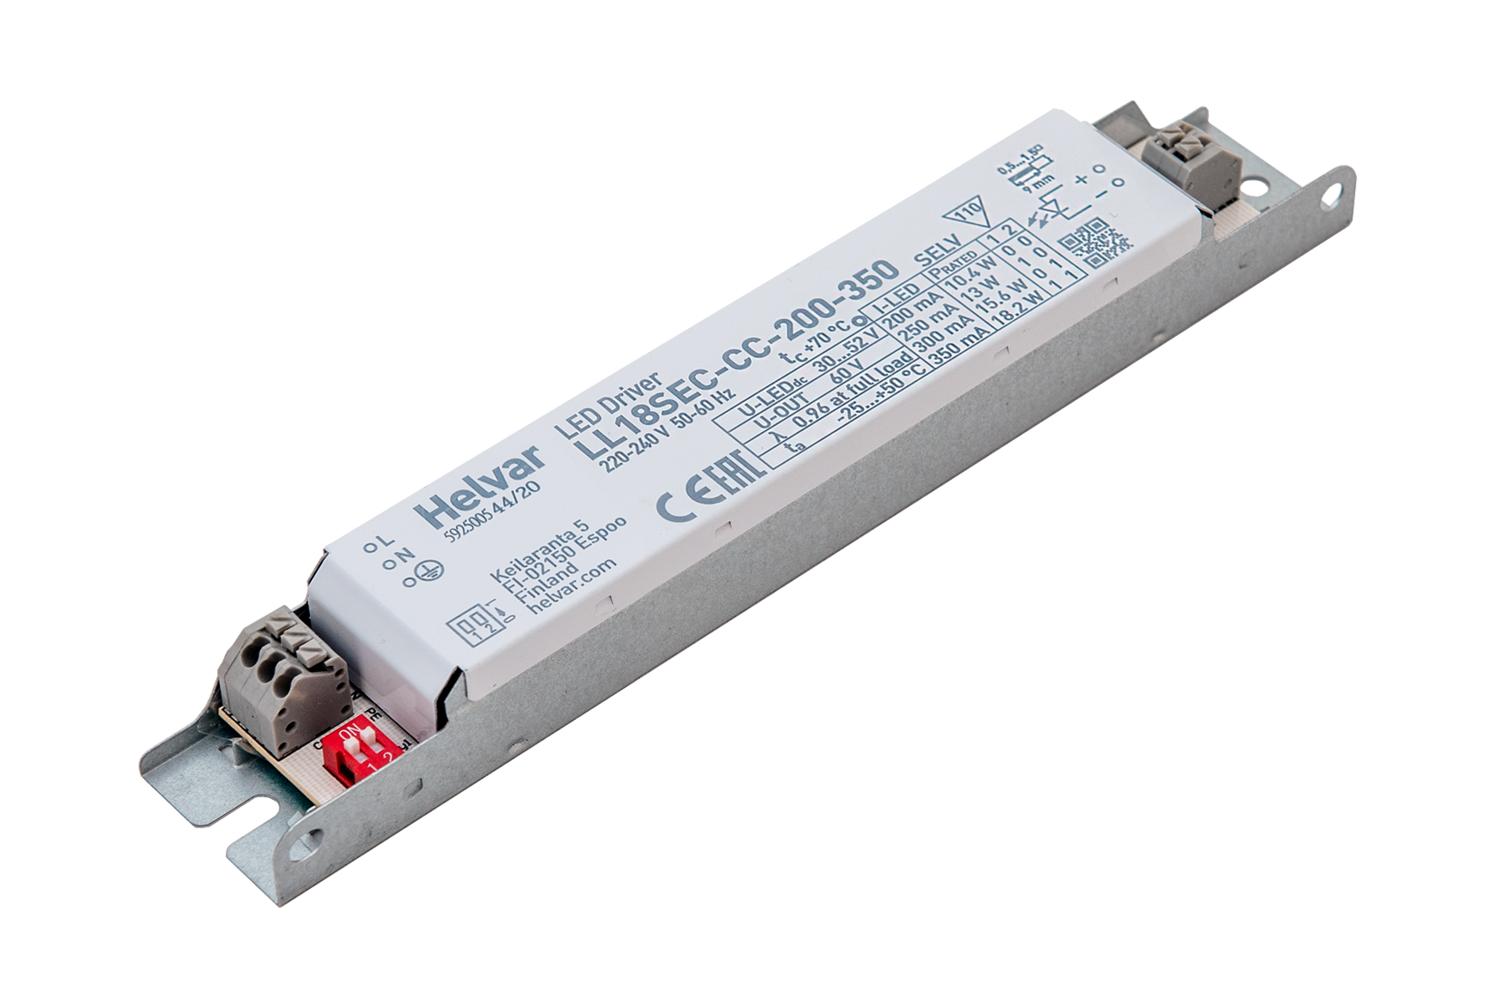 SELV protected non-dimmable 18W LED driver